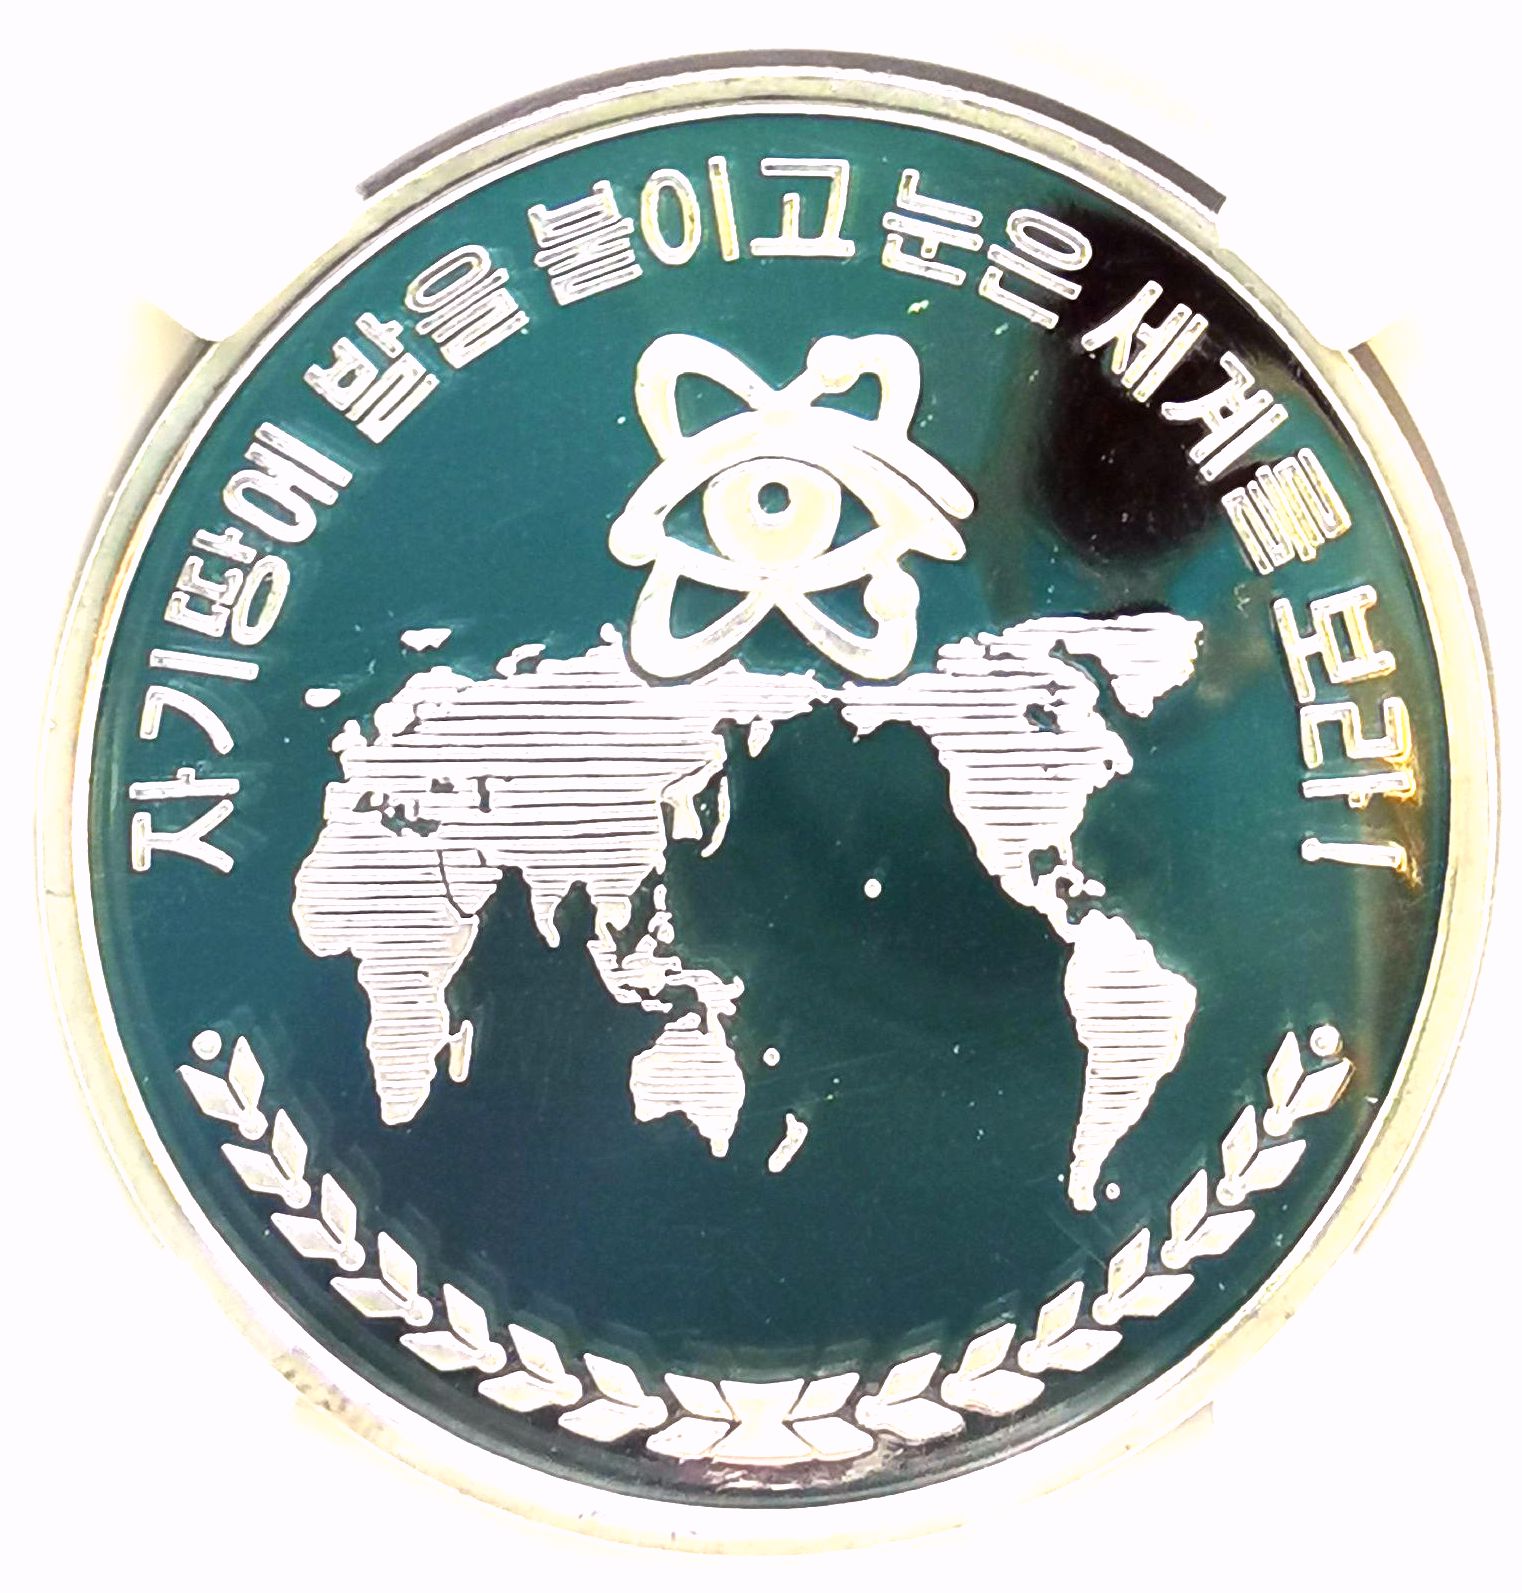 L3630, Korea Proof Silver Coin, "Opening to World, Map" 2019 Grade